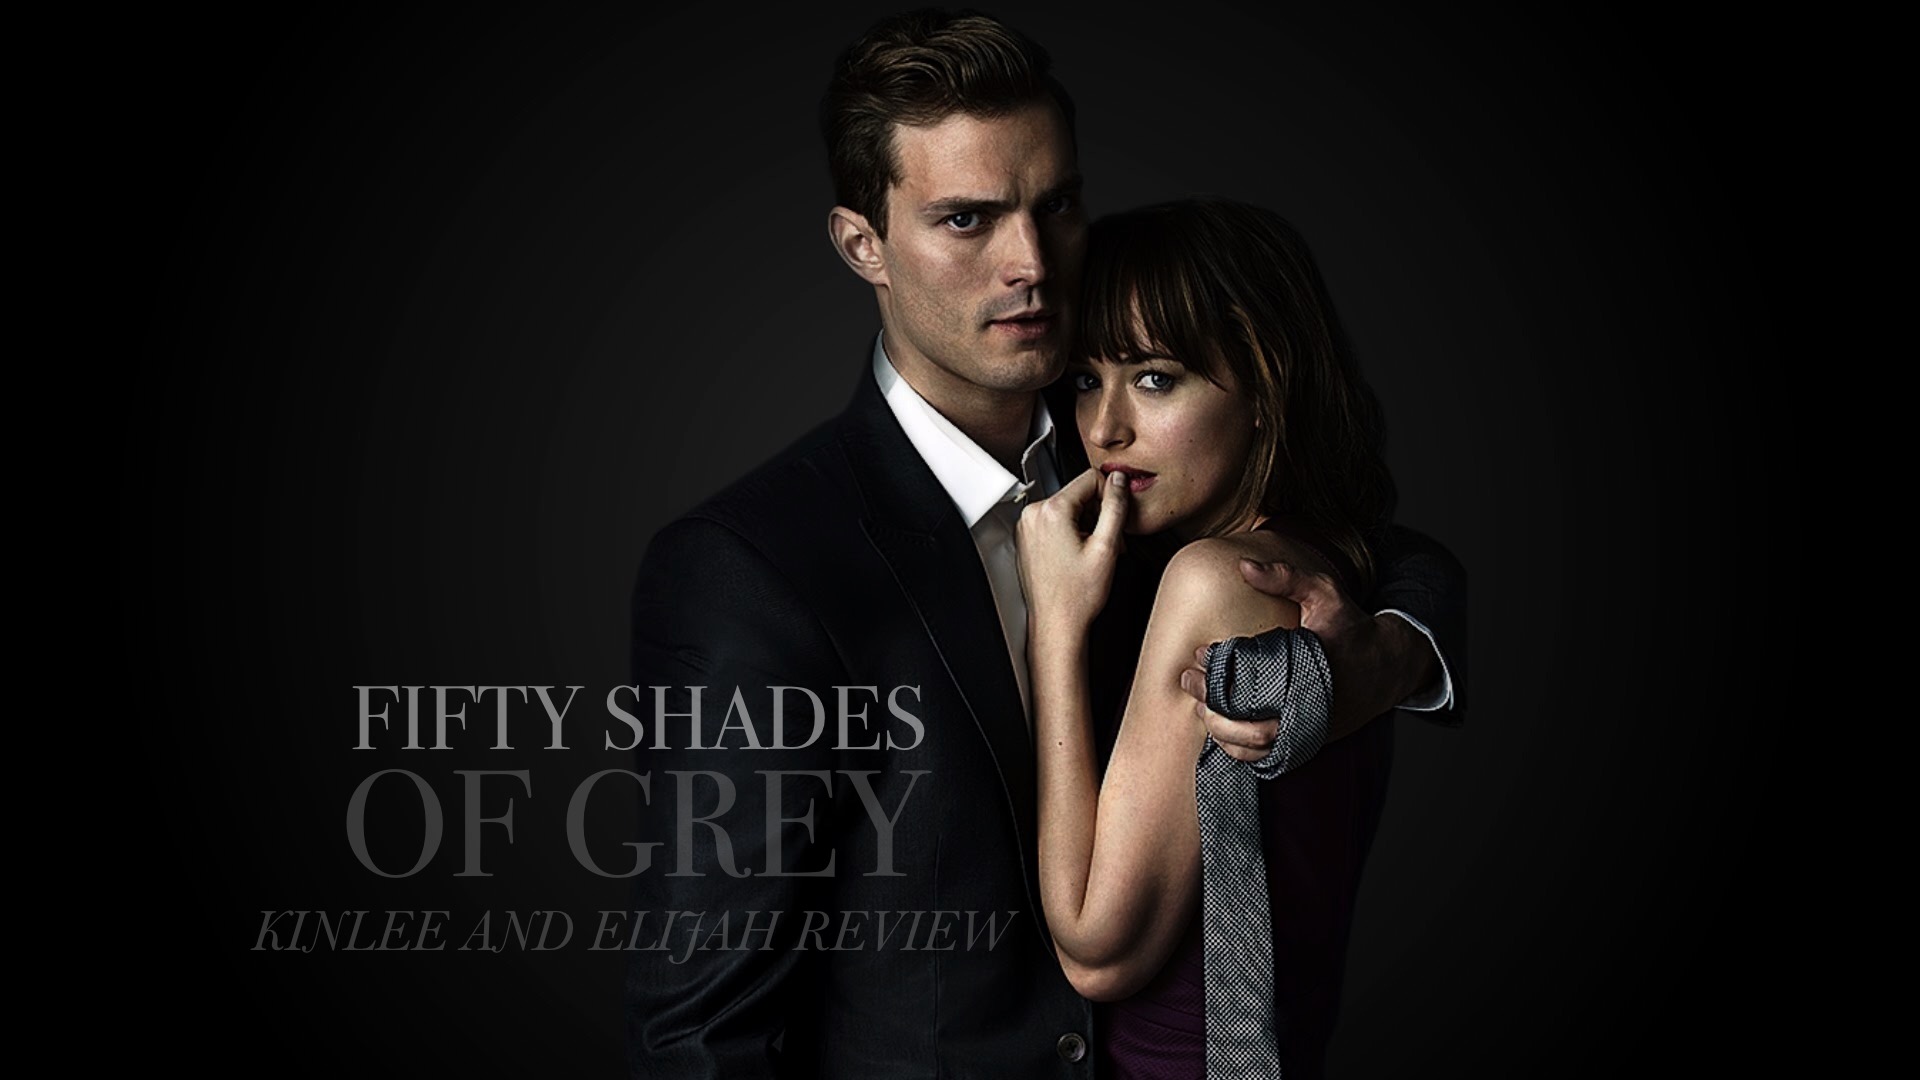 Buy Fifty shades of grey Free